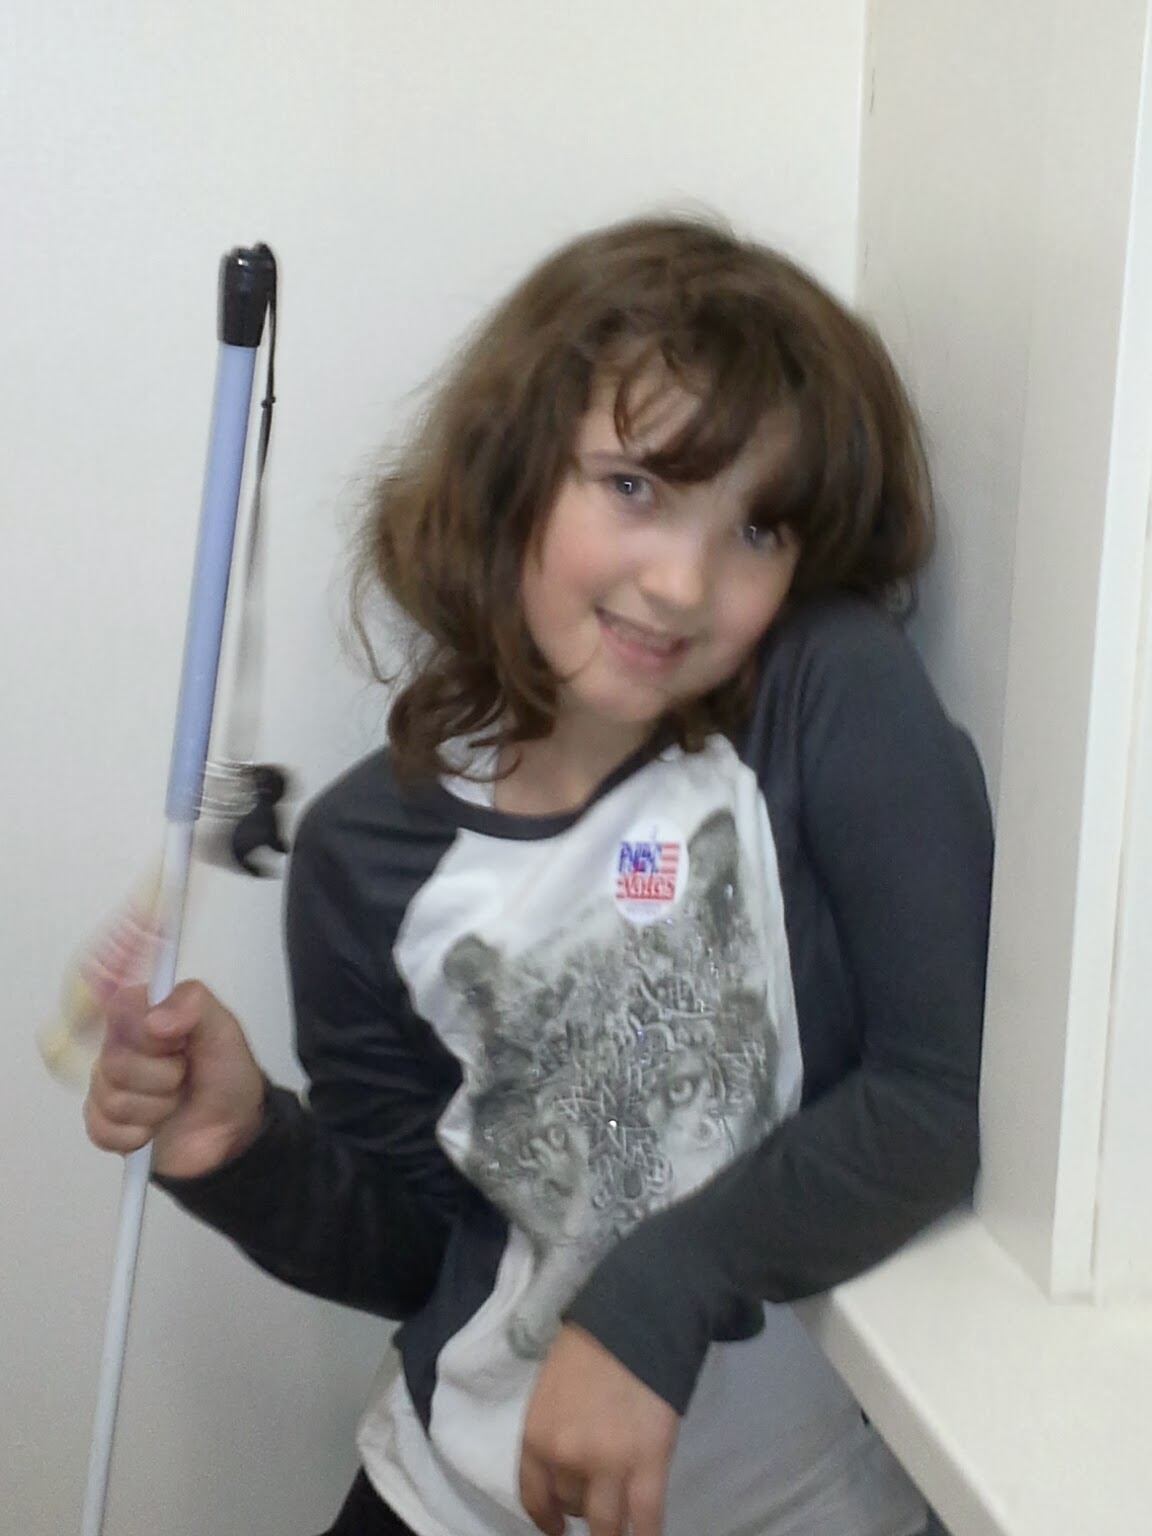 A girl with dark hair wearing a wolf long sleeve shirt and holding a white cane smiles